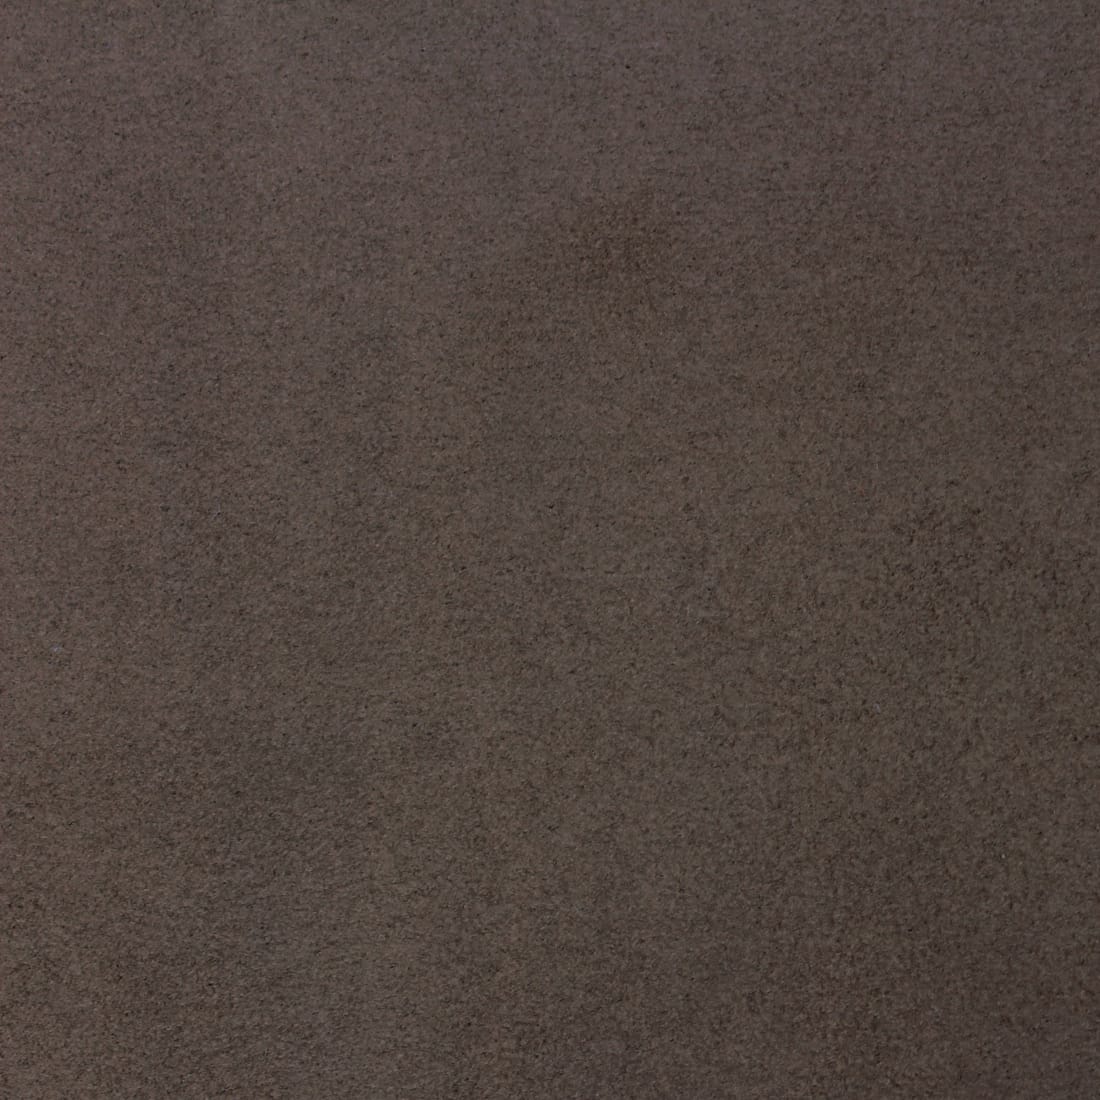 Imported SUEDE Solid Design 200 GSM Fabric 60" (152 cms) - Coffee Brown